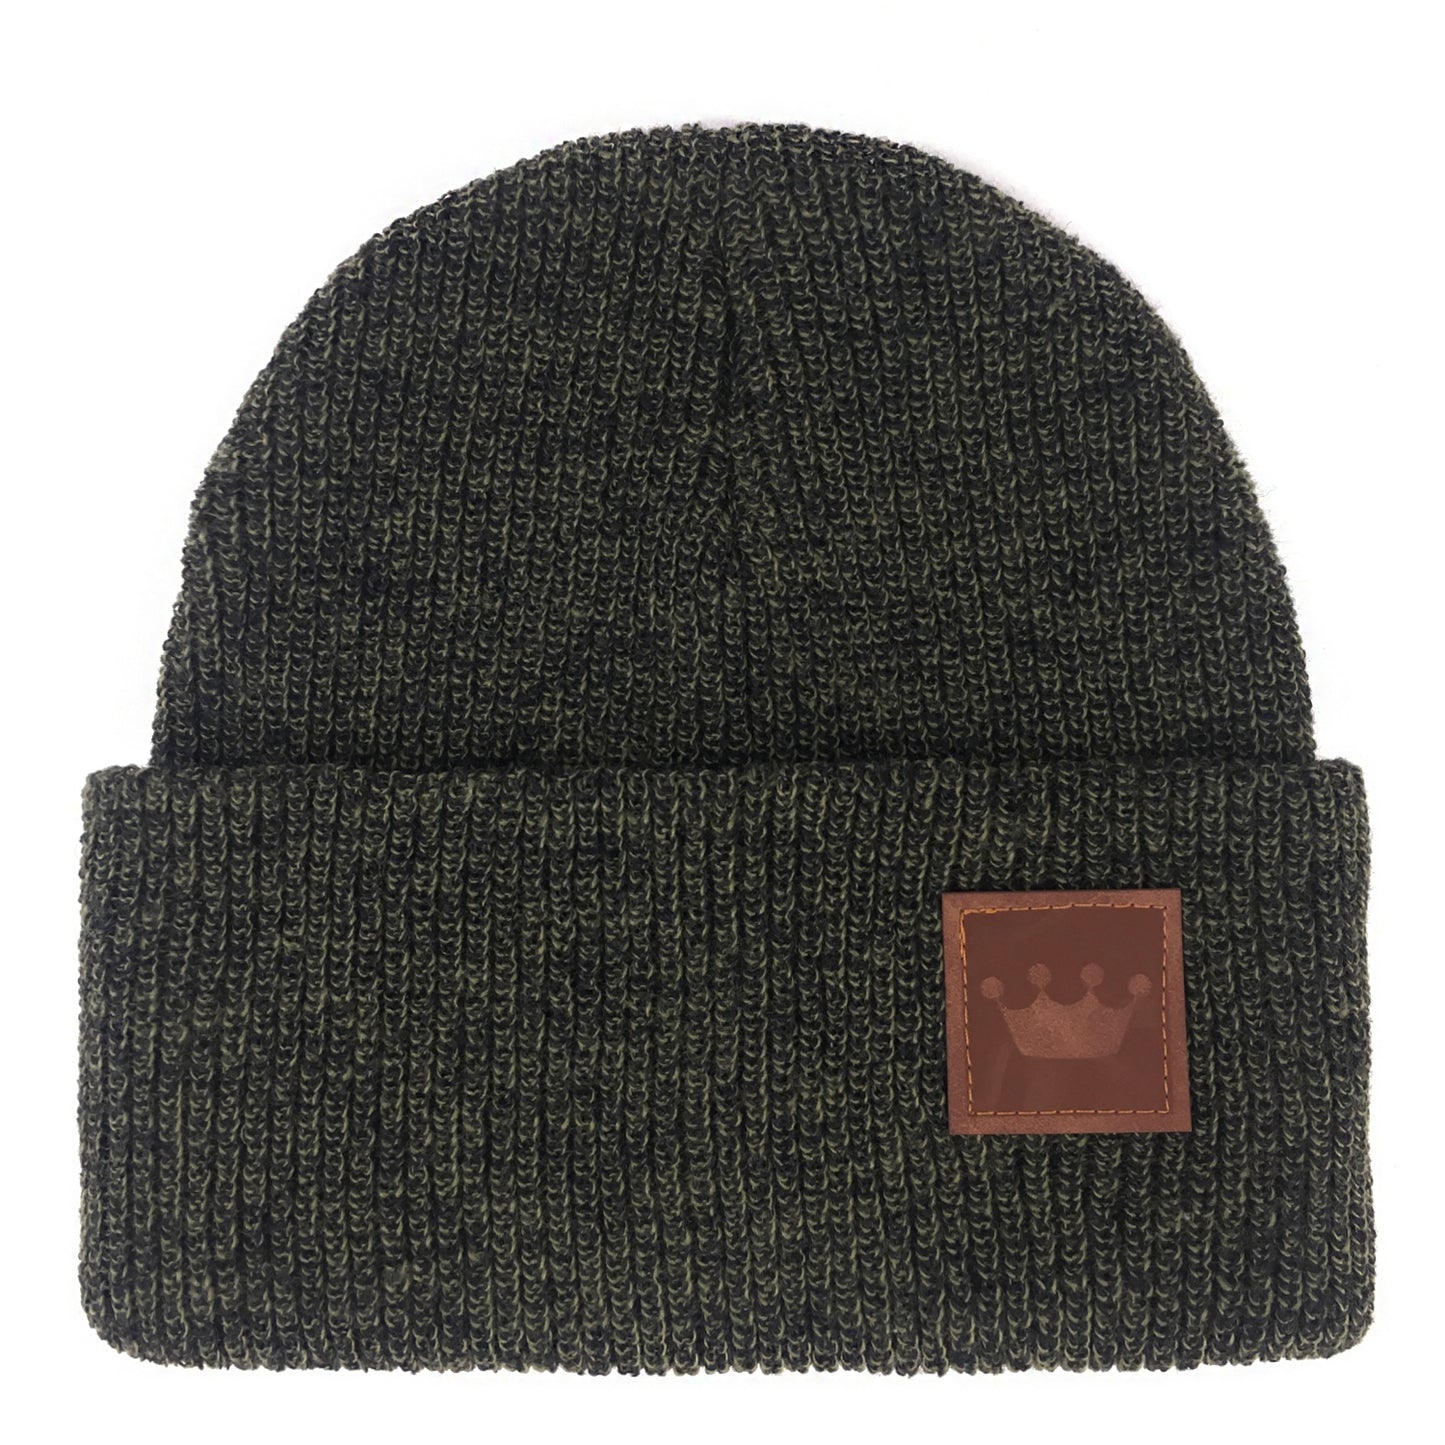 Prime Delux Fold up Beanie - Moss - Prime Delux Store